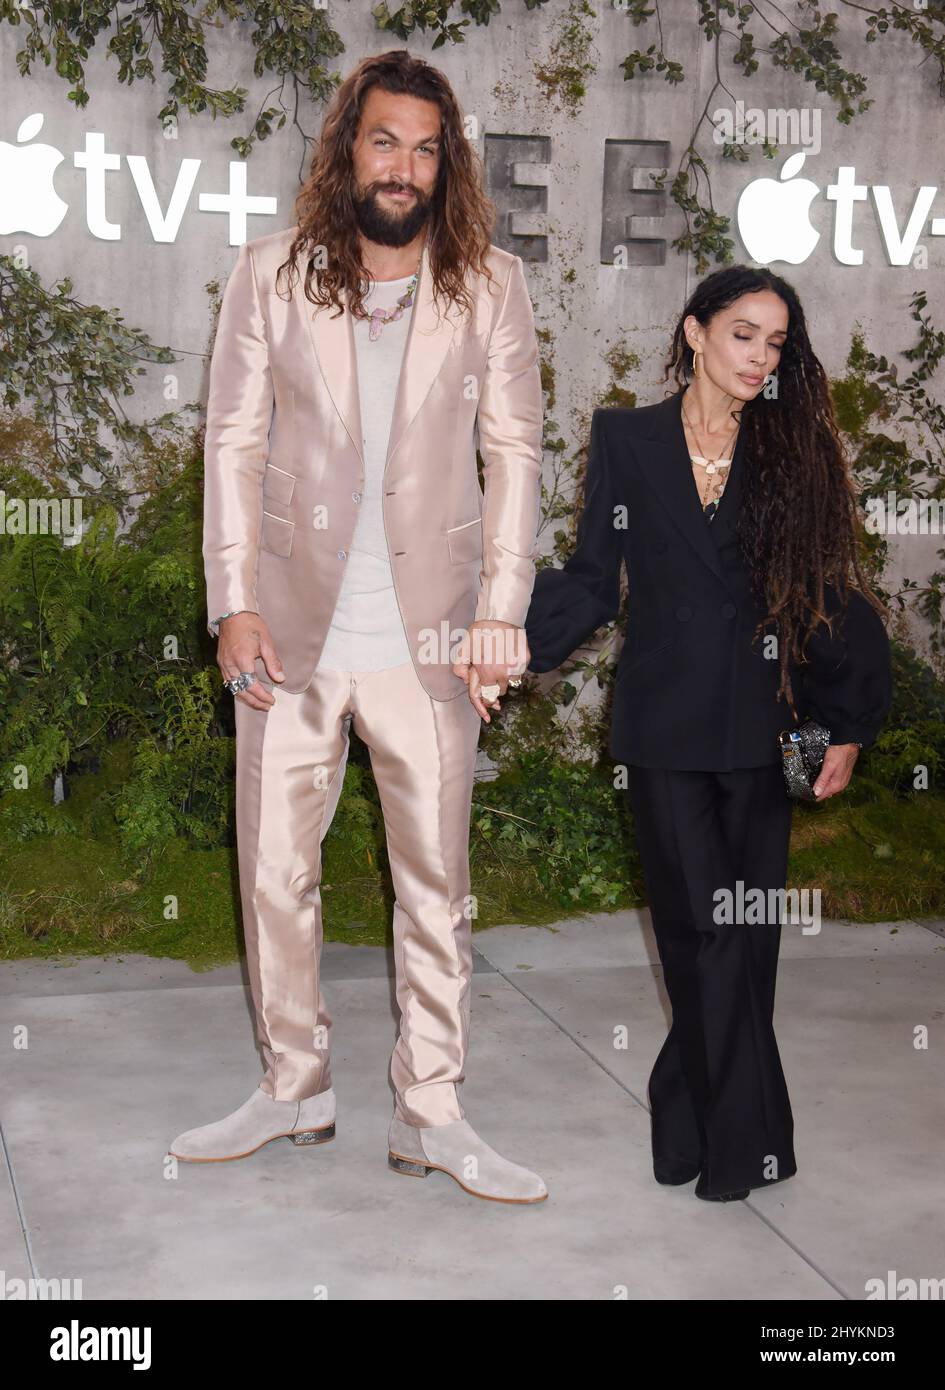 Jason Mamoa and Lisa Bonet at Apple TV+'s 'See' World Premiere held at the Regency Village Theatre on October 21, 2019 in Westwood, CA. Stock Photo